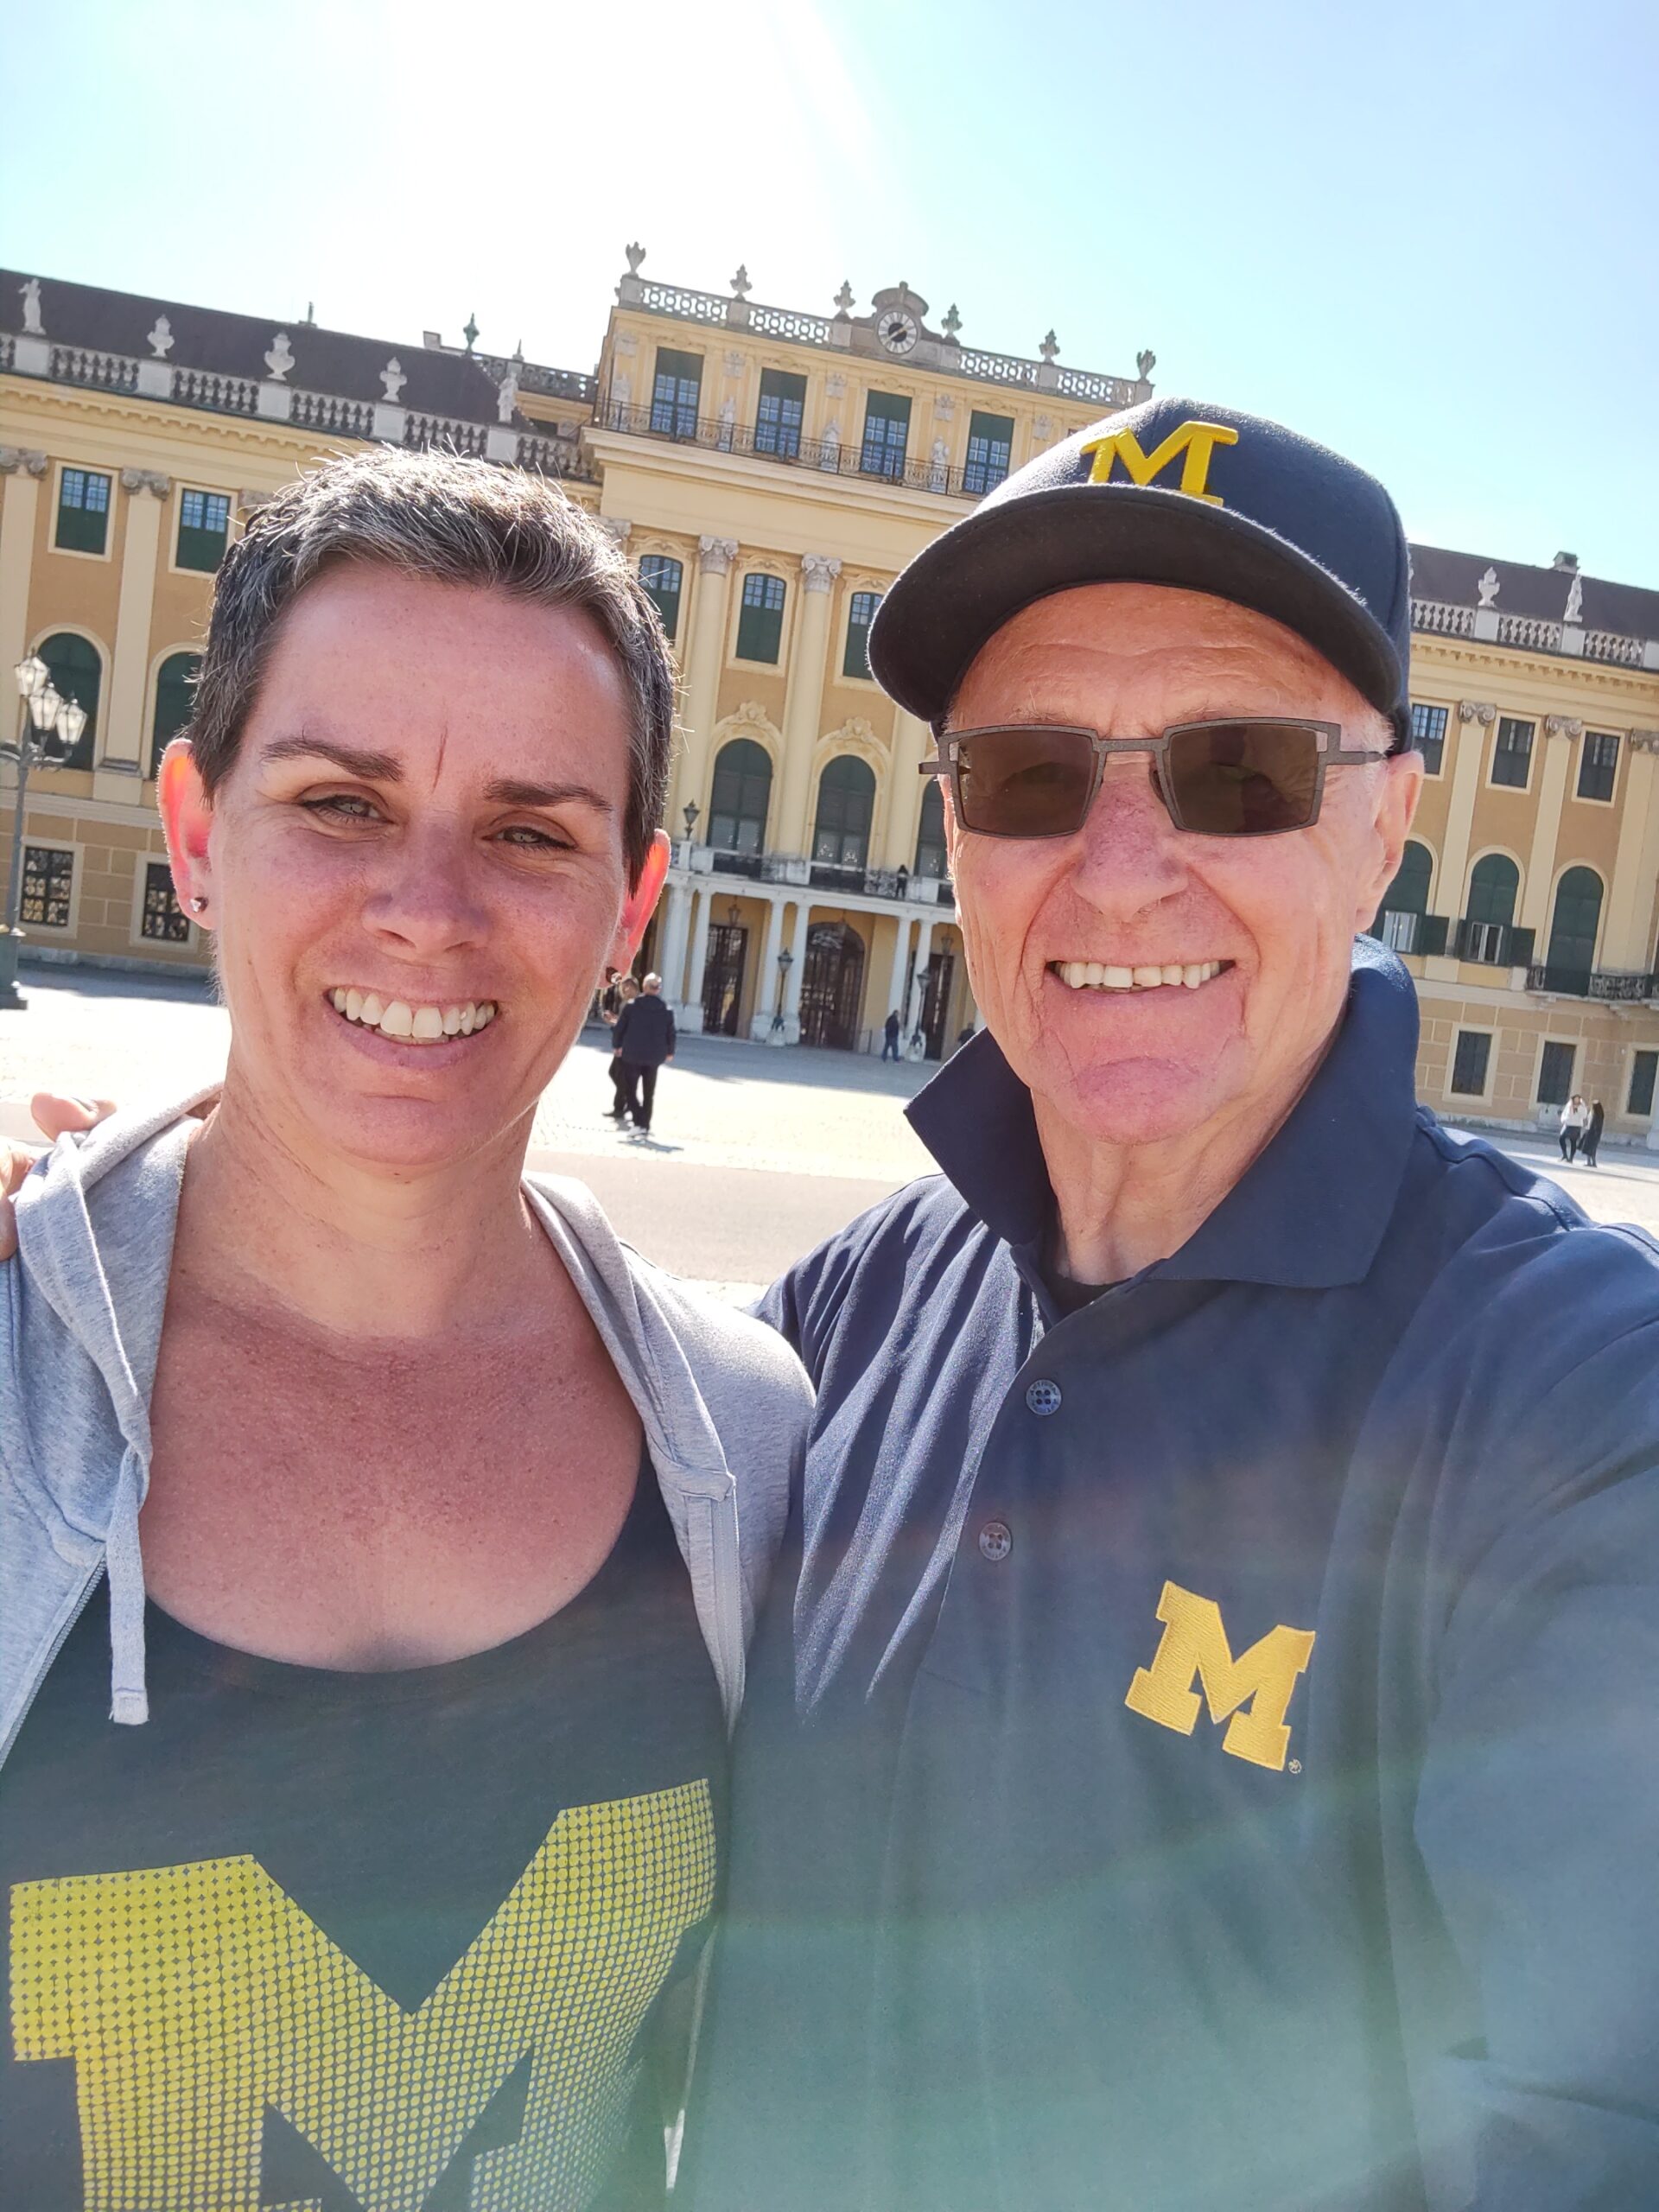 Paul Carder, ’62, and his wife, Jacqueline MacNeil, took a tour of Europe over the summer, including a photo op at the Schönbrunn Palace in Vienna, Austria.